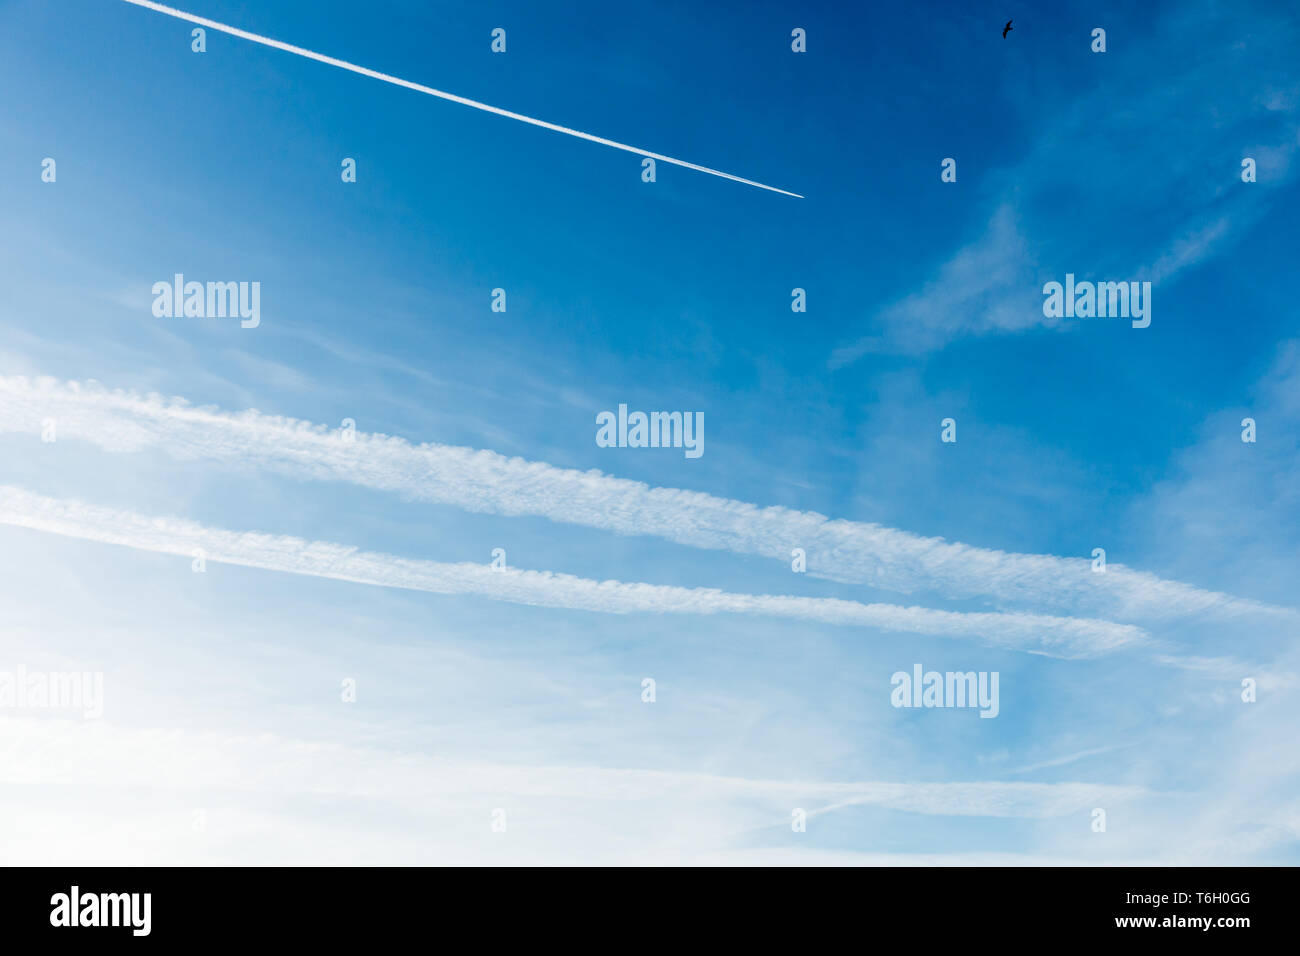 Blue sky covered with chemtrails and a plane flying, leaving a contrail, chemtrail. Stock Photo